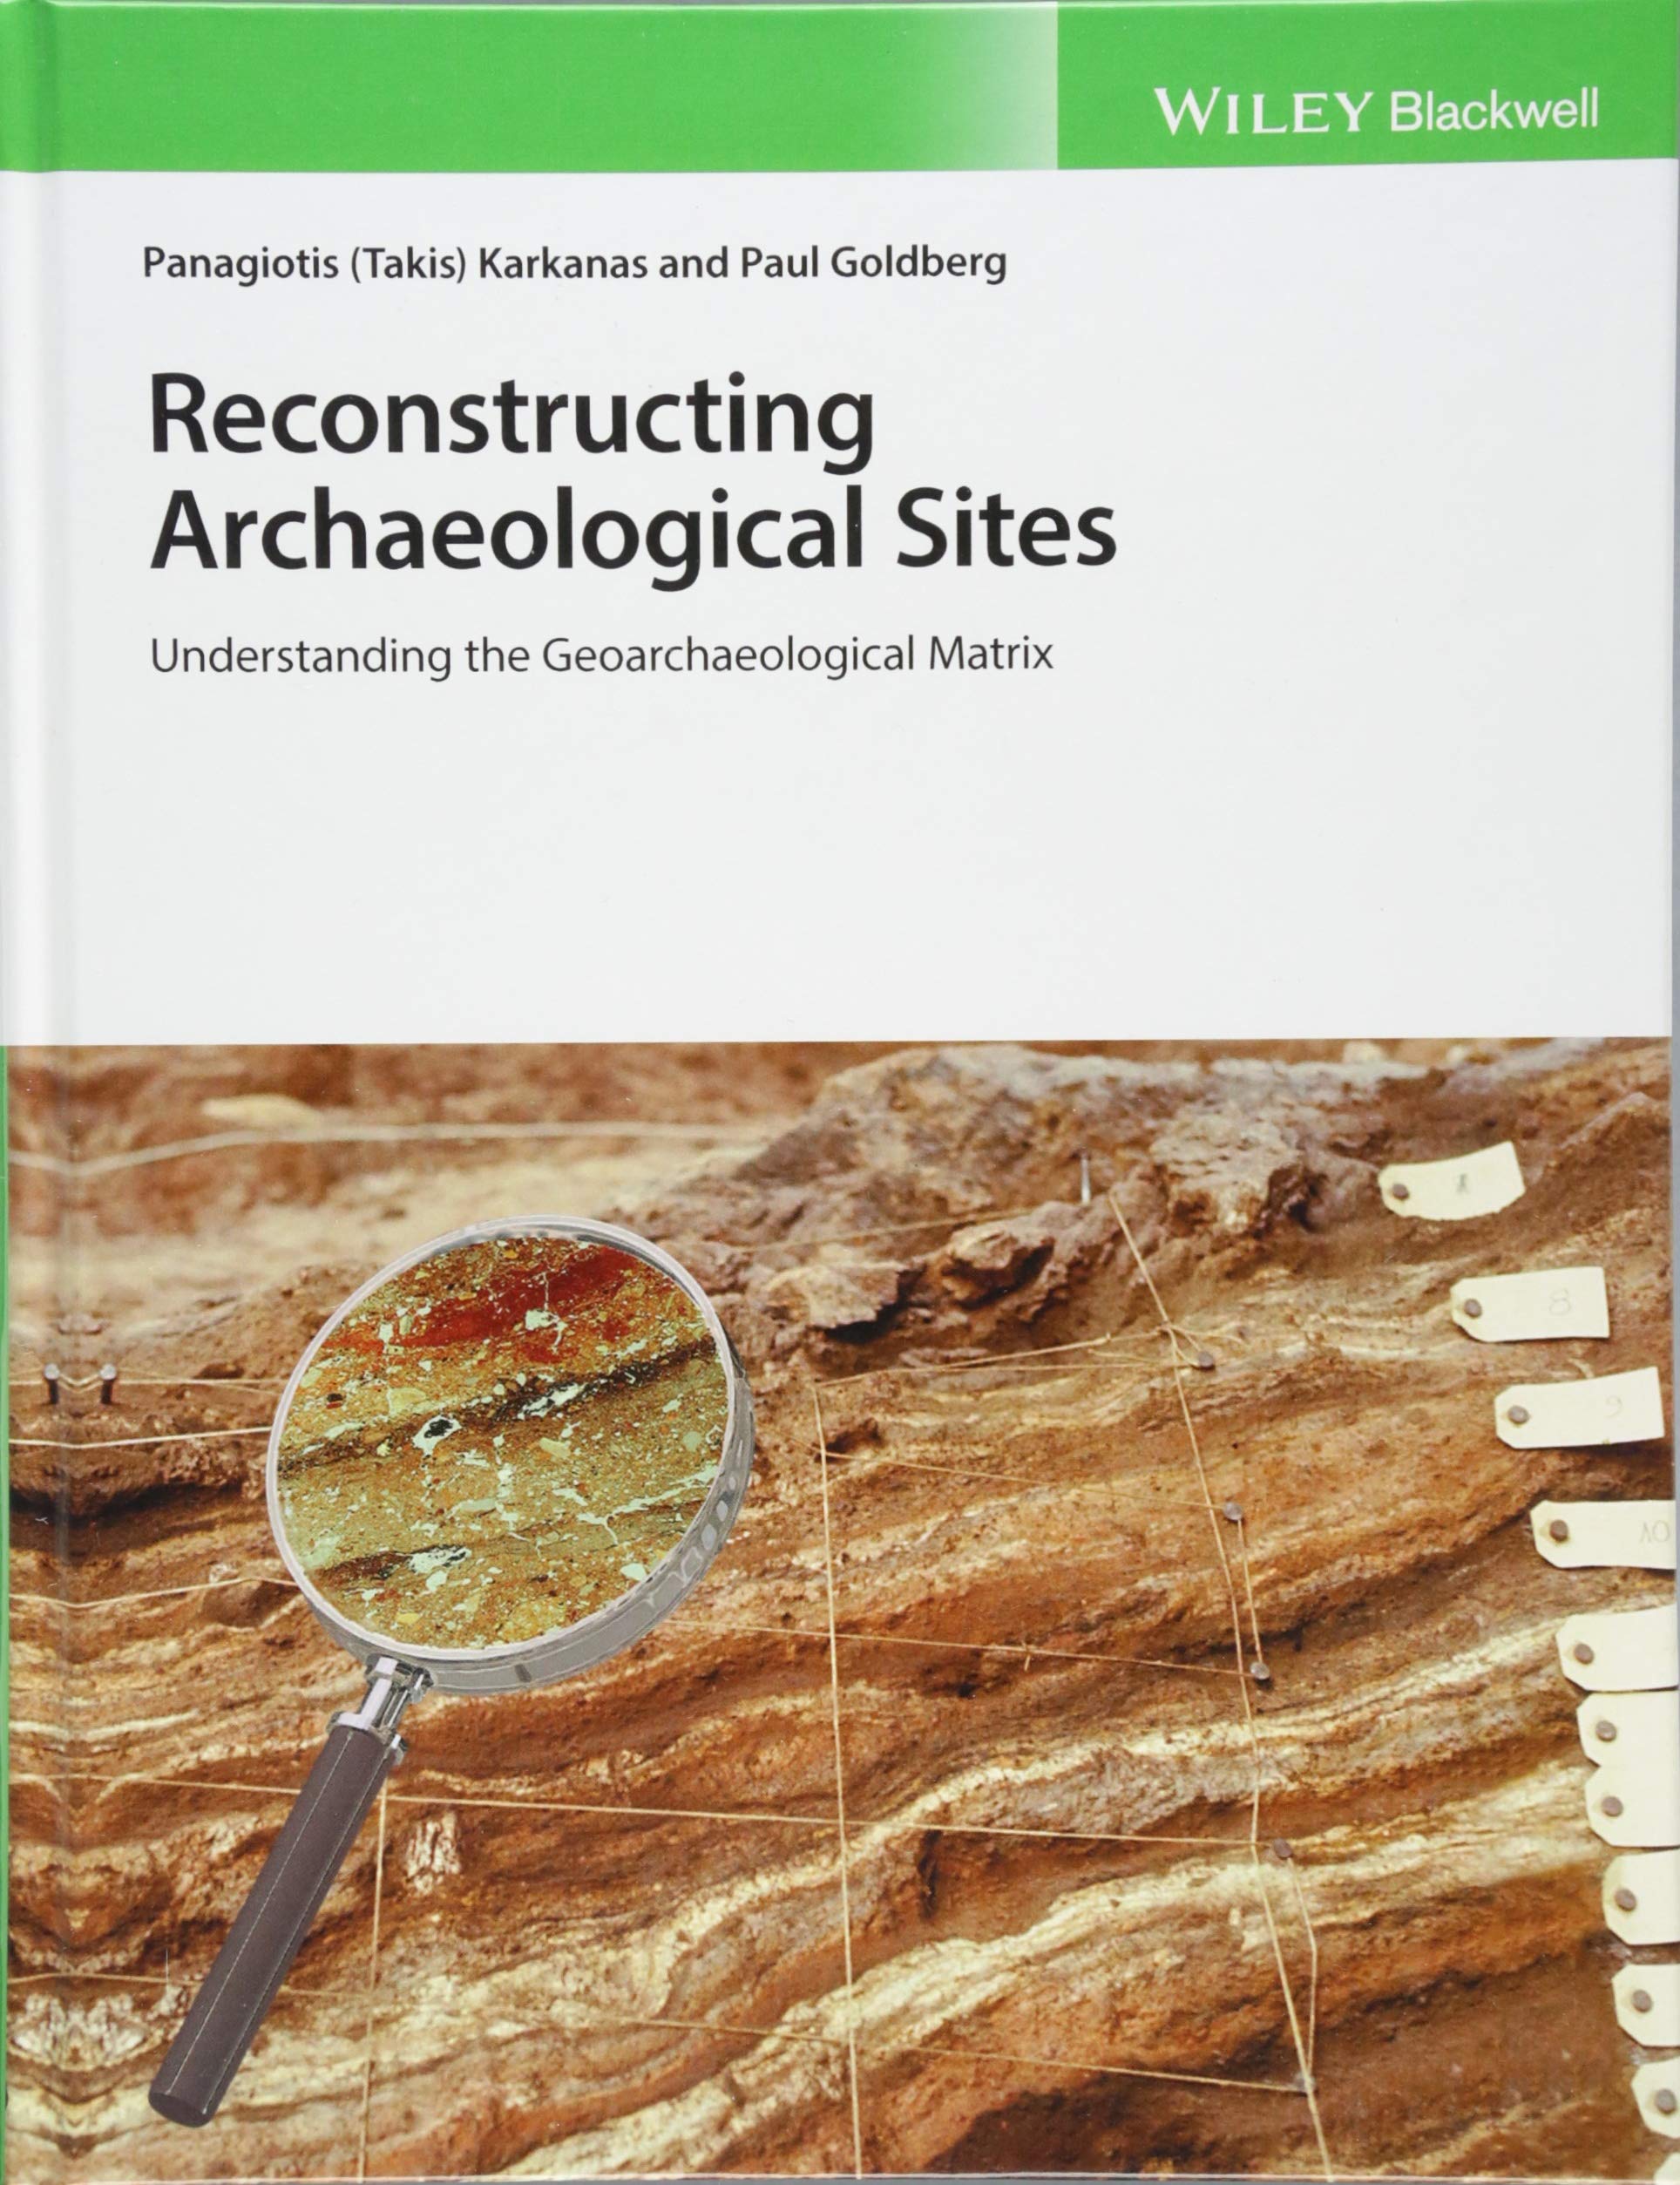 Reconstructing Archaeological Sites. Understanding the Geoarchaeological Matrix, 2018, 296 p.